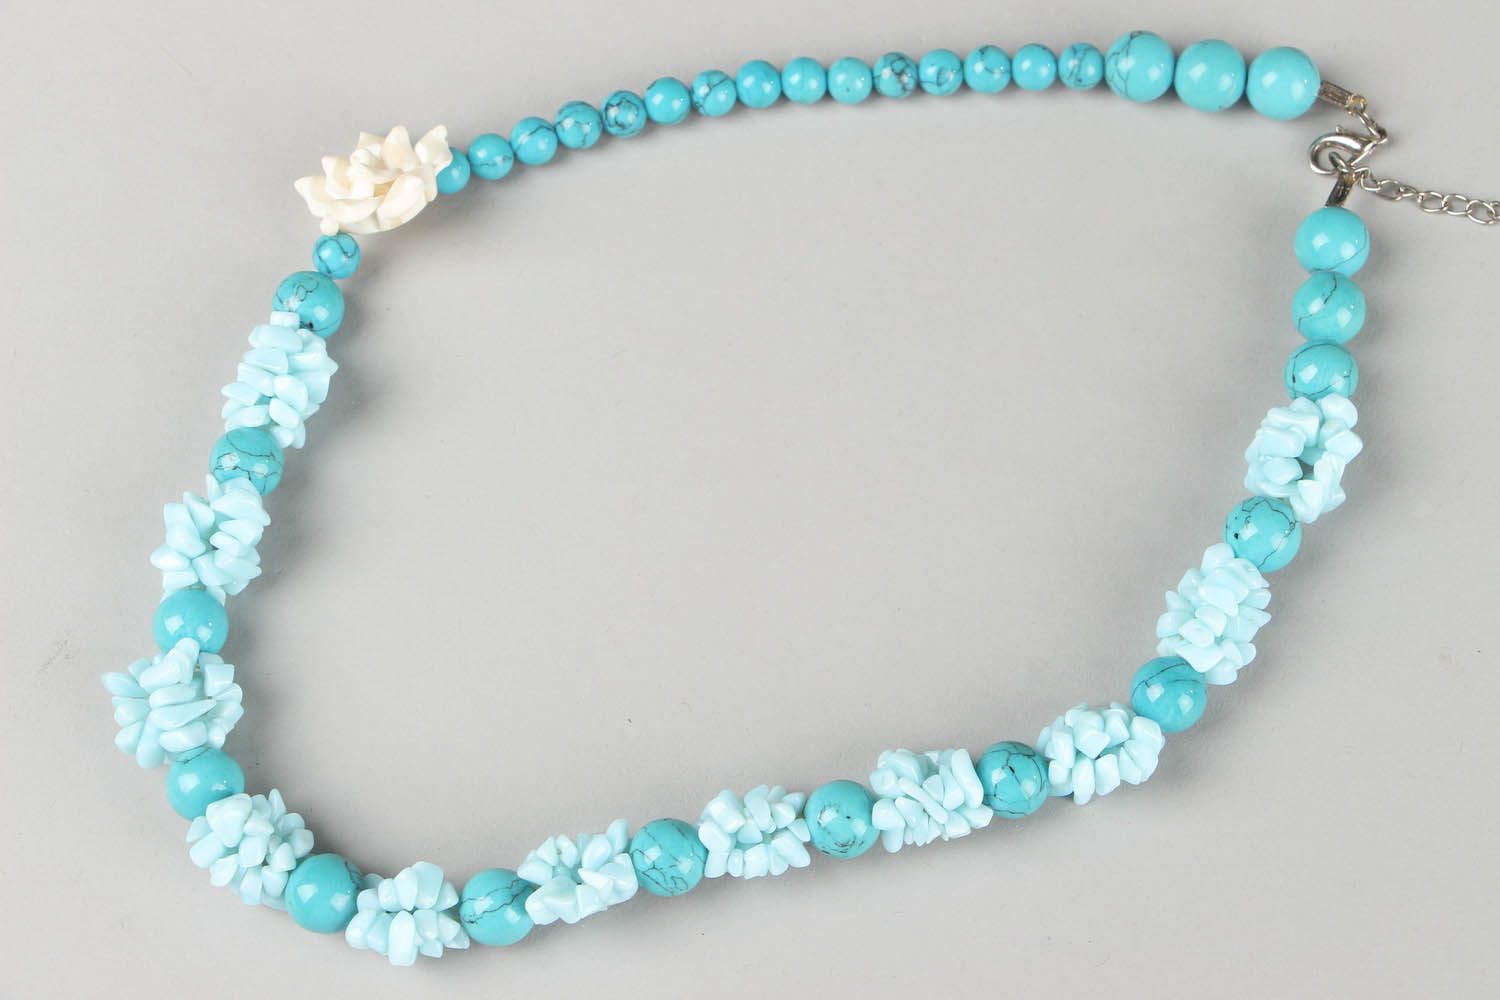 Bead necklace made of turquoise photo 3